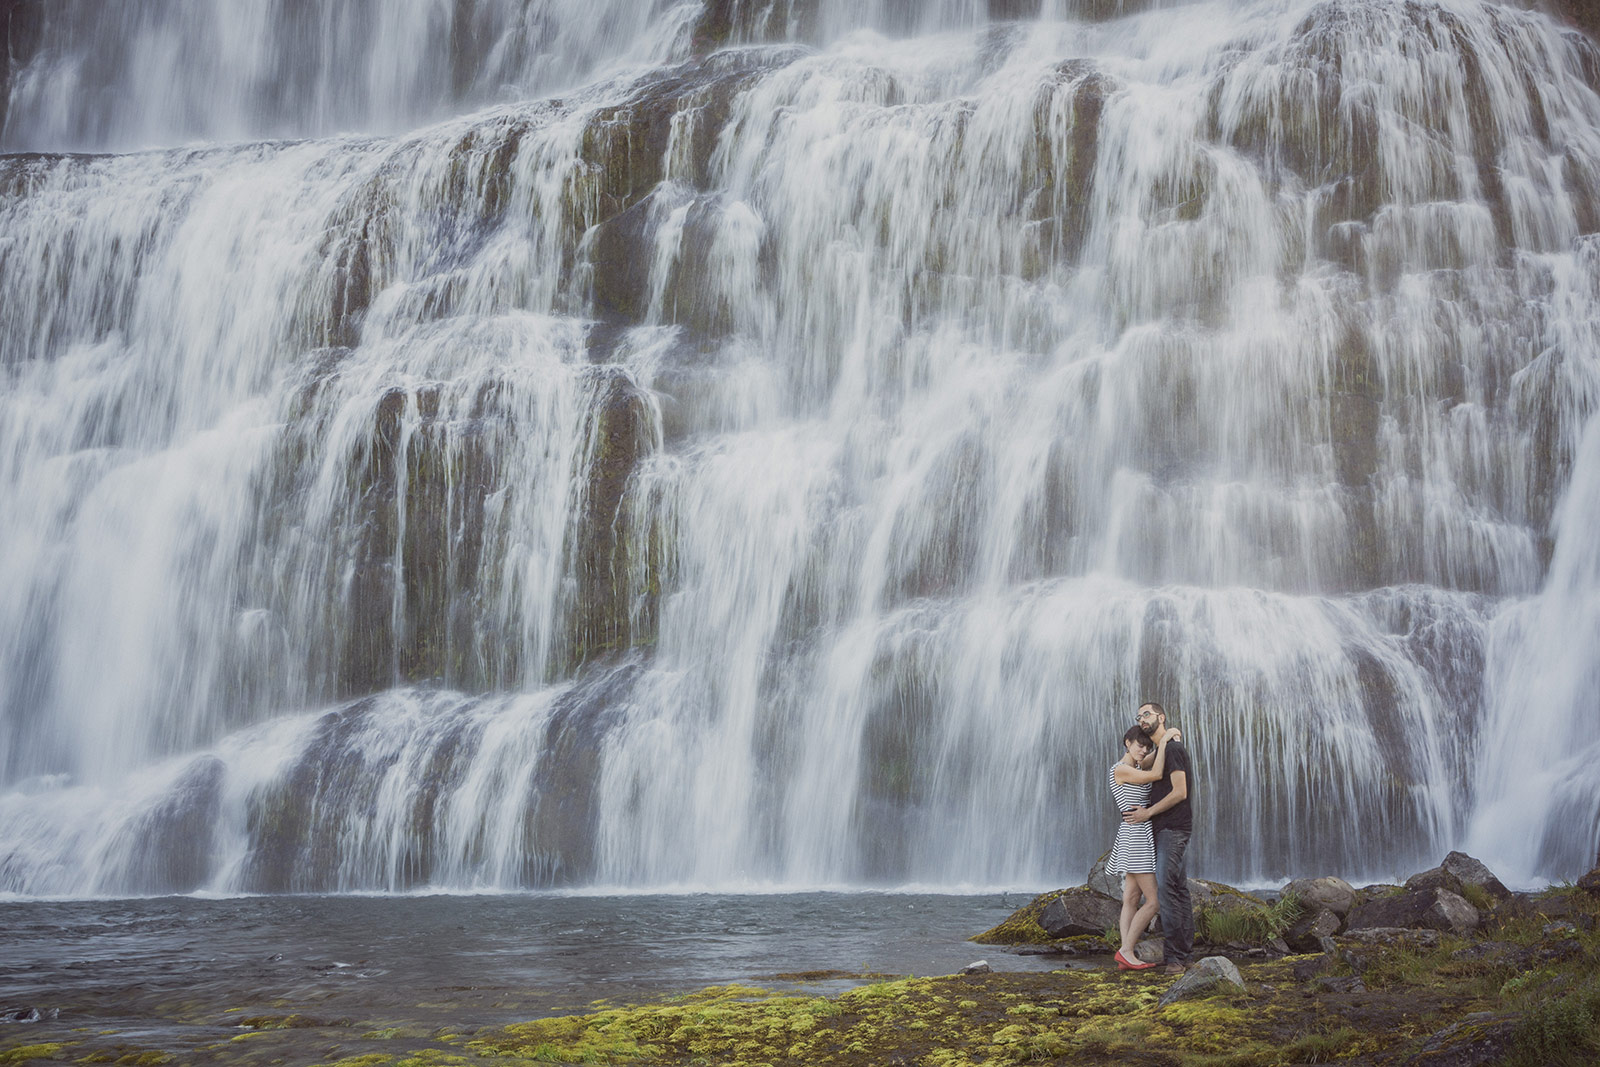 A man and woman standing in front of a waterfall.